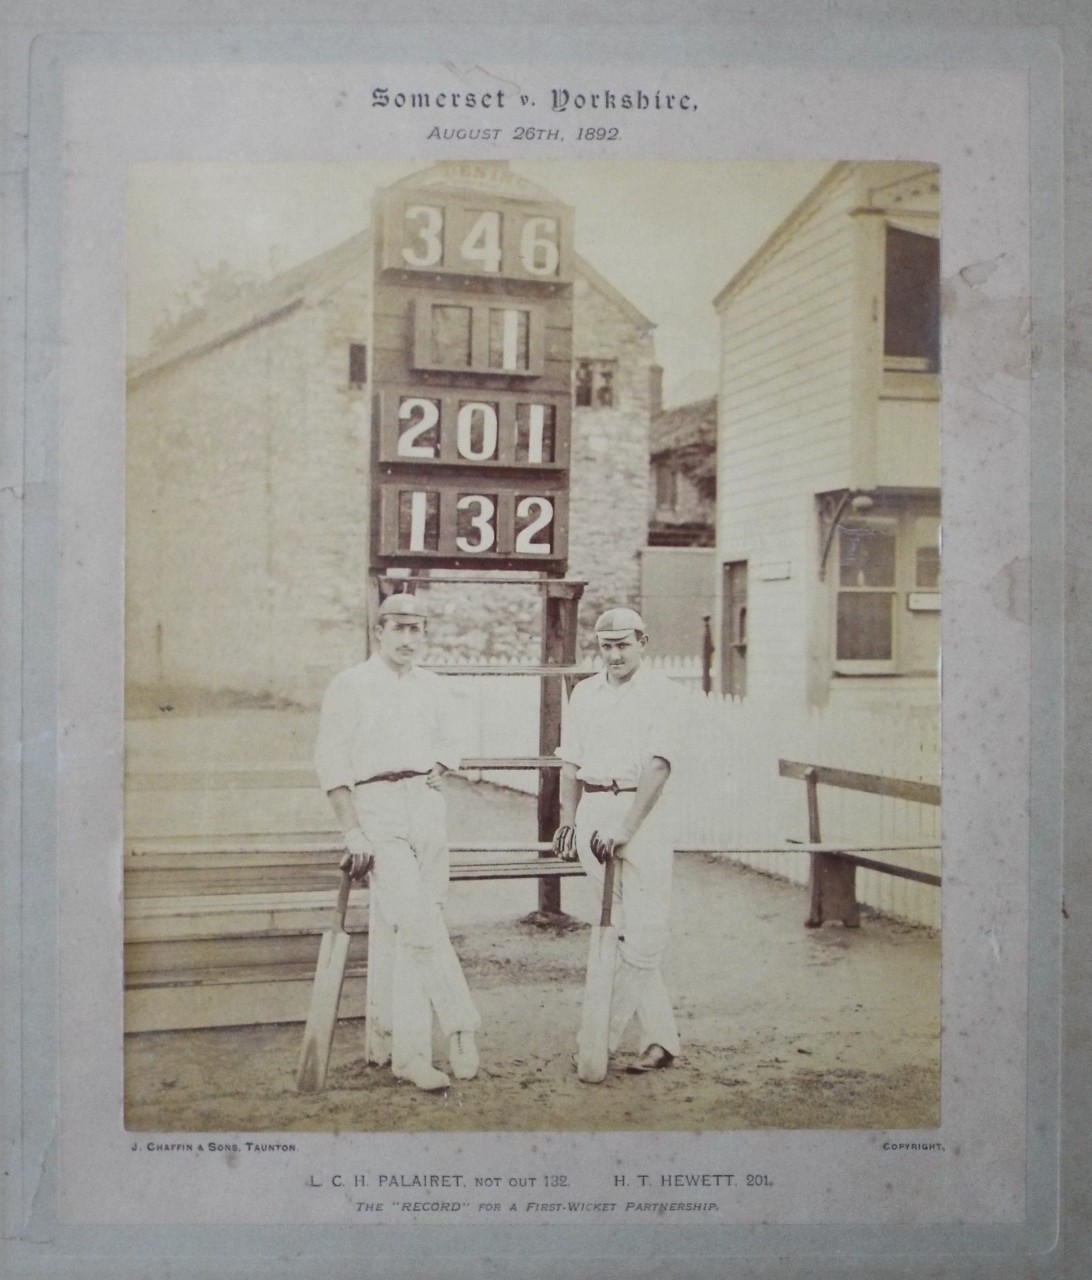 Photograph - Somerset v. Yorkshire, August 26th, 1892.